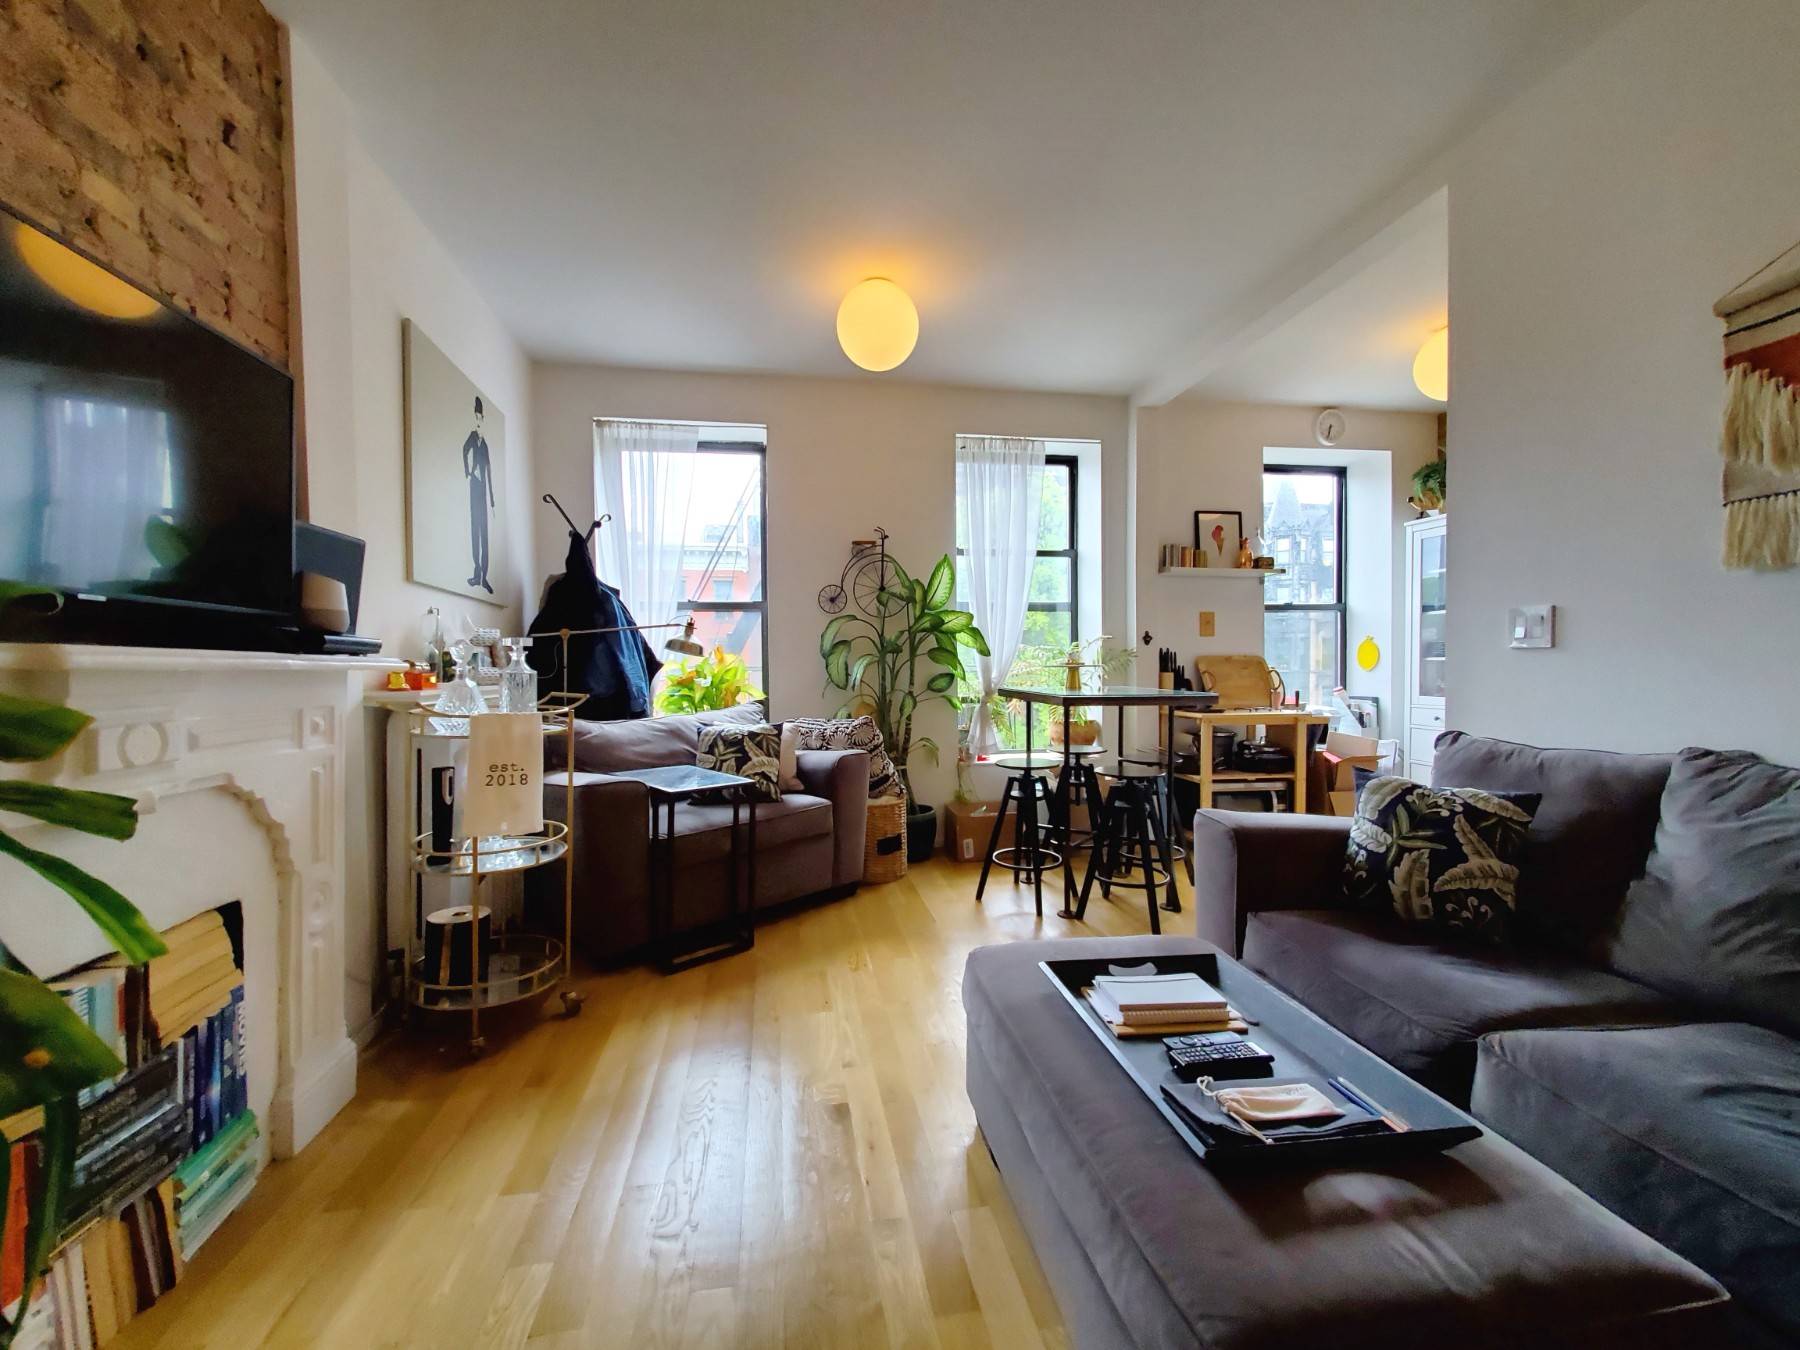 NO FEE Stunning, sunny, spacious, one bedroom in Clinton Hill, just steps from the Clinton Washington C train stop.